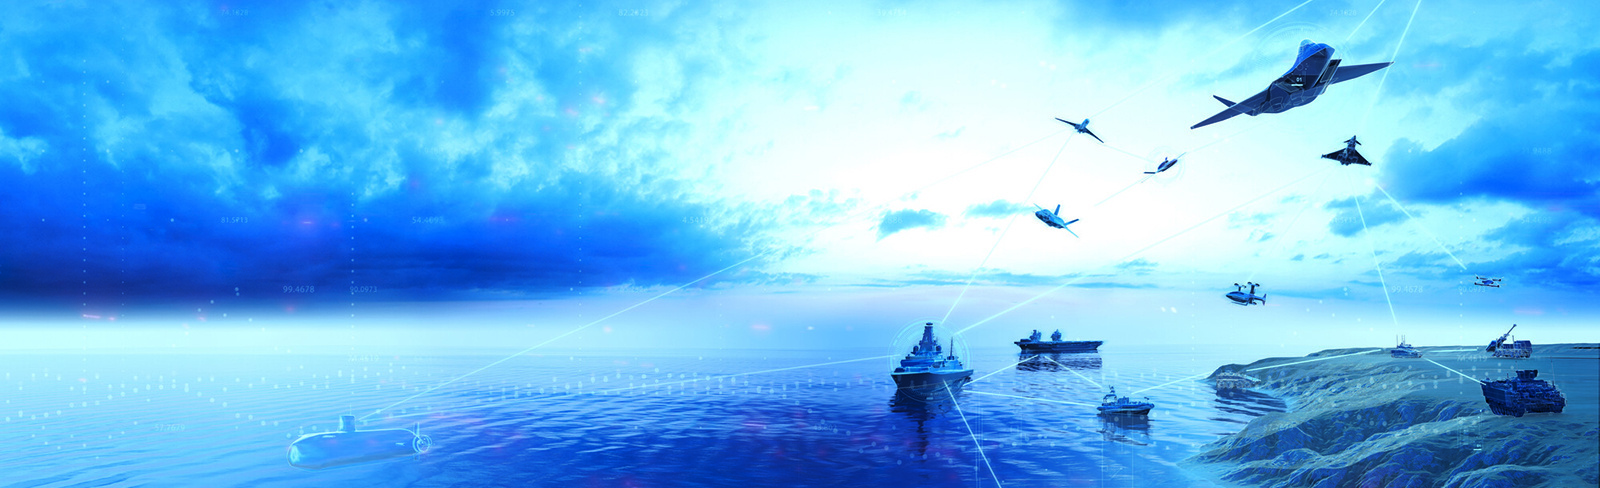 Ships and airplanes in a blue image